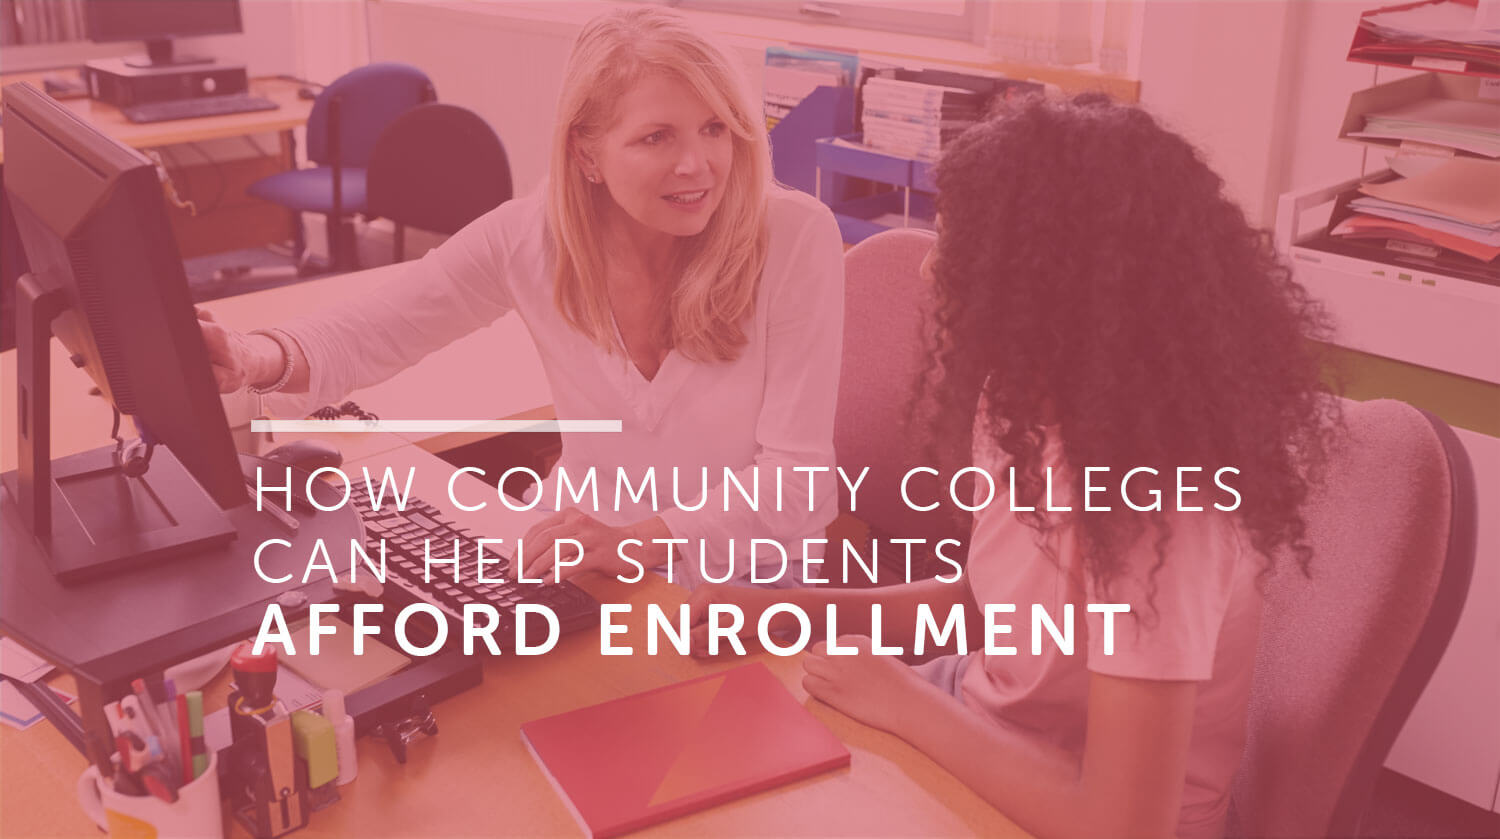 How Community colleges can help students afford enrollment